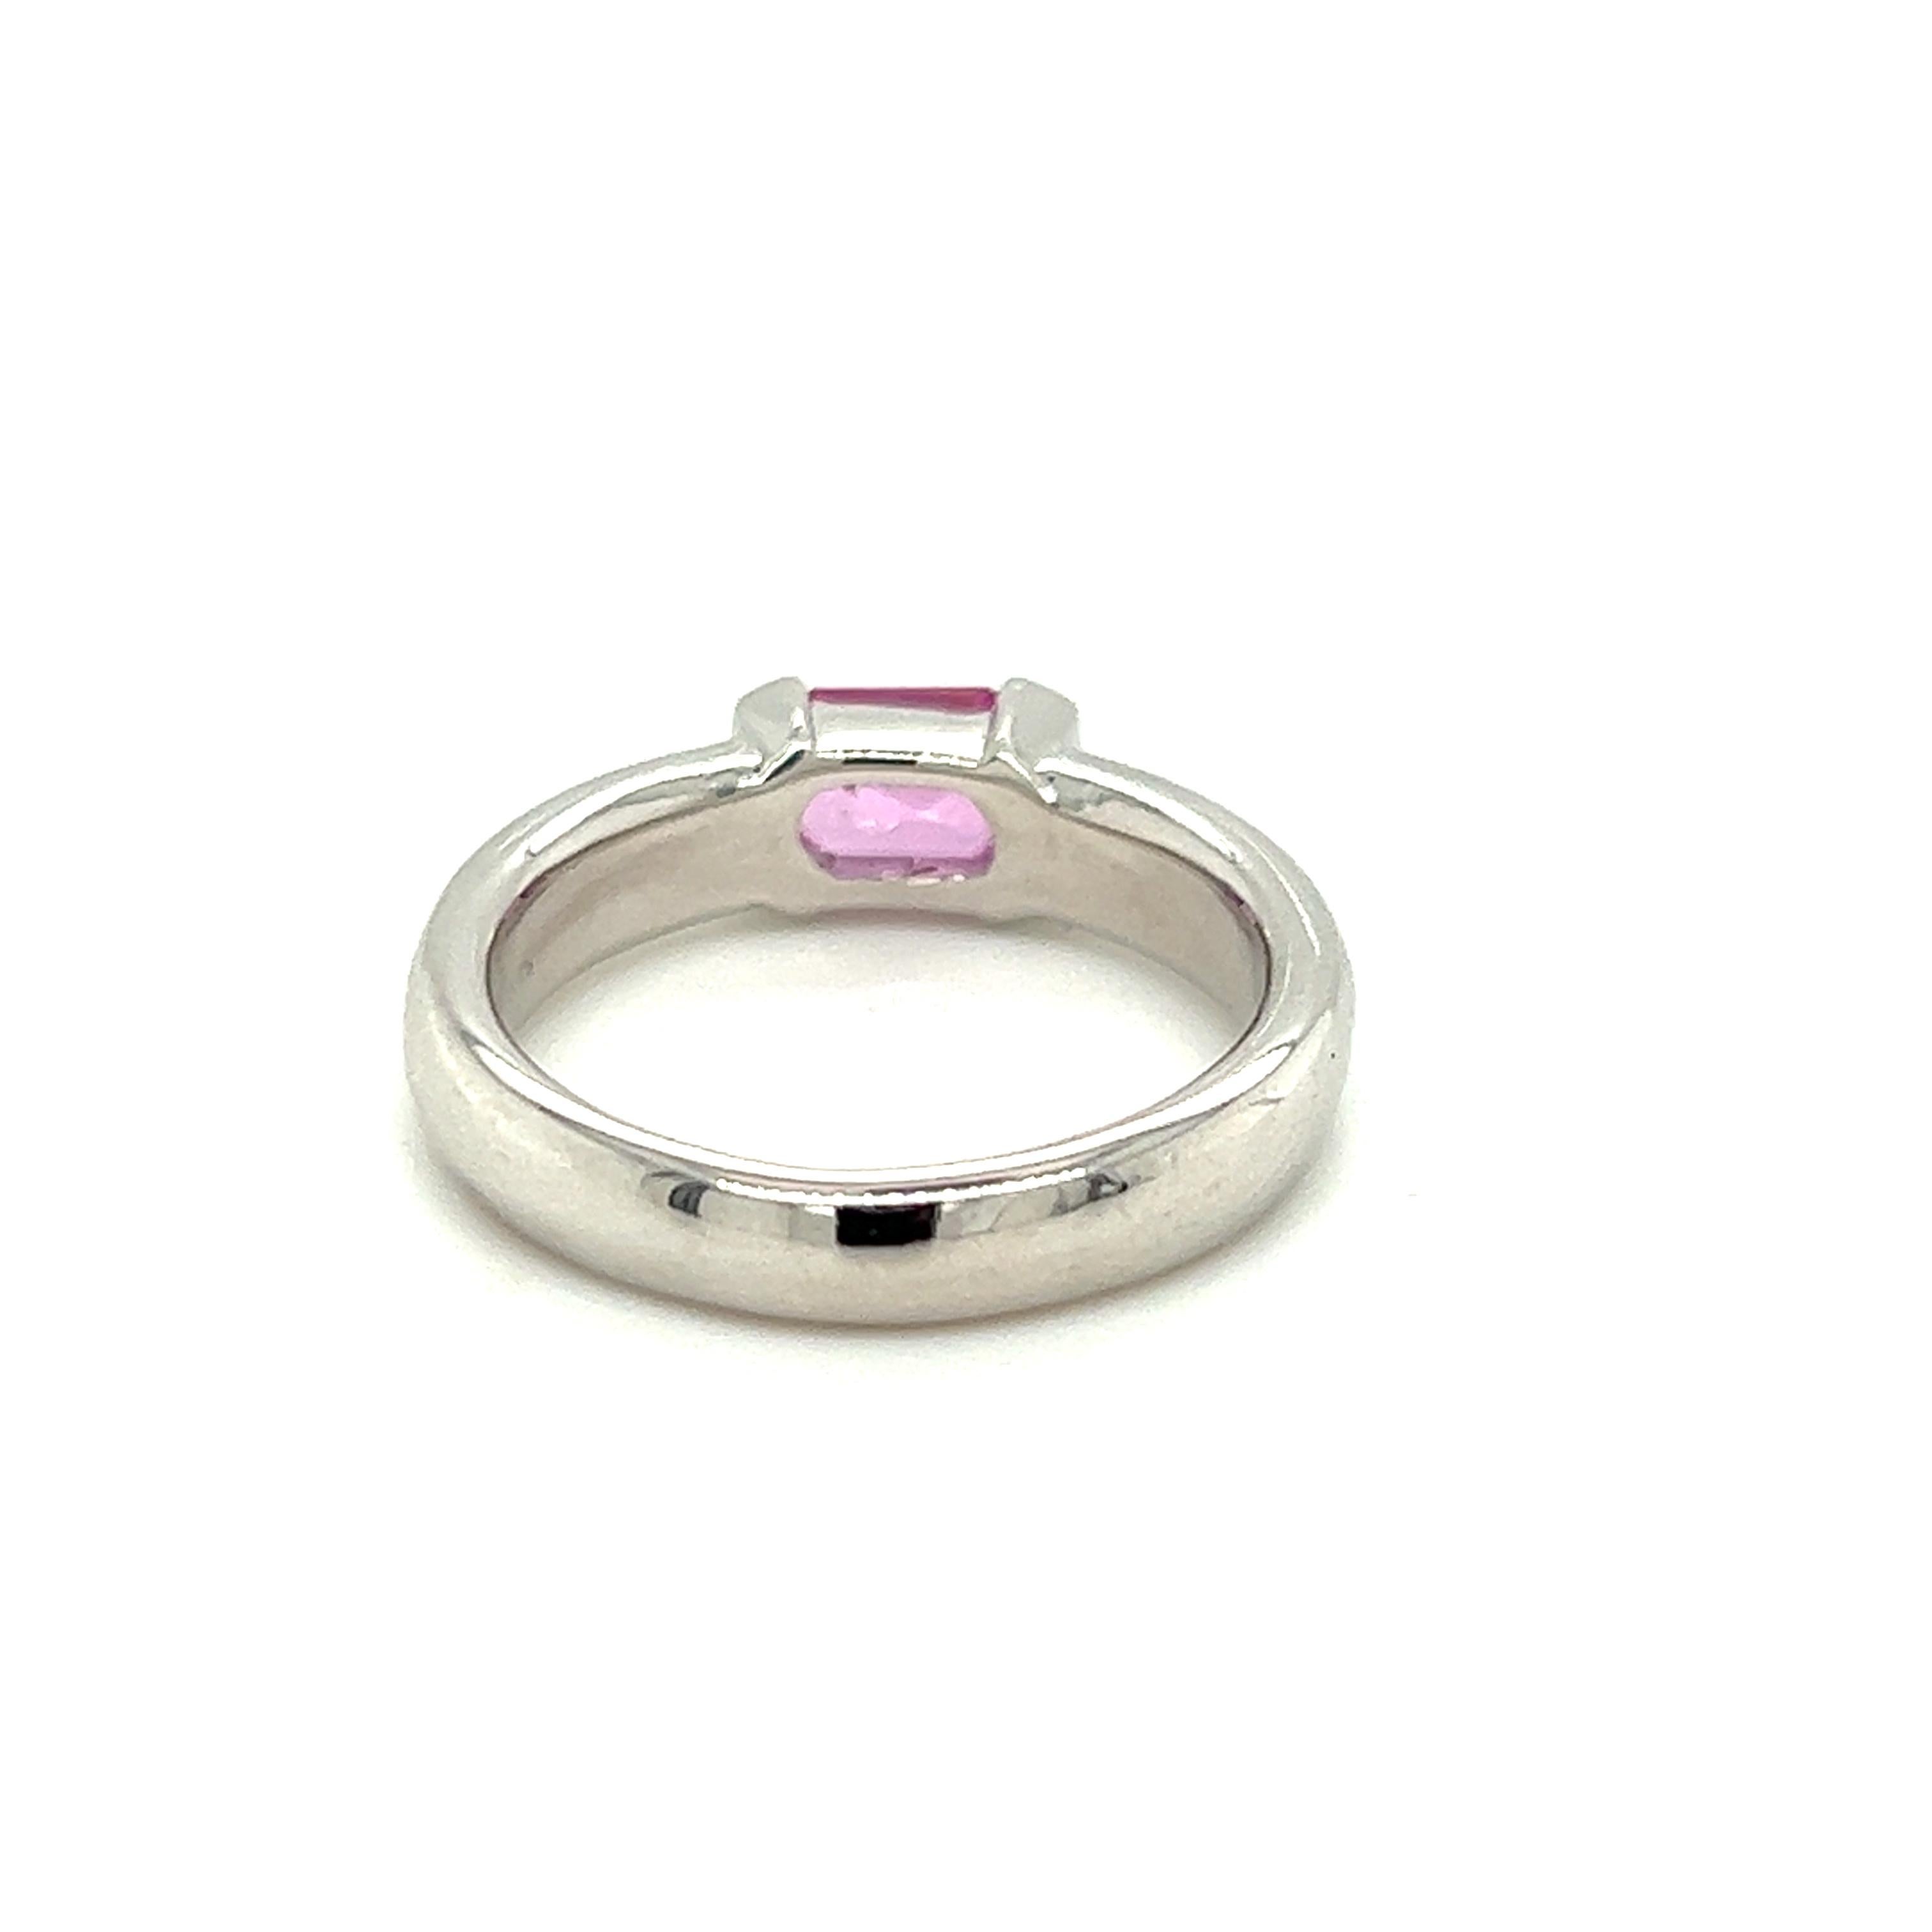 Emerald Cut Vintage Effy Bita Collection Natural Pink Sapphire Ring in 14k Gold